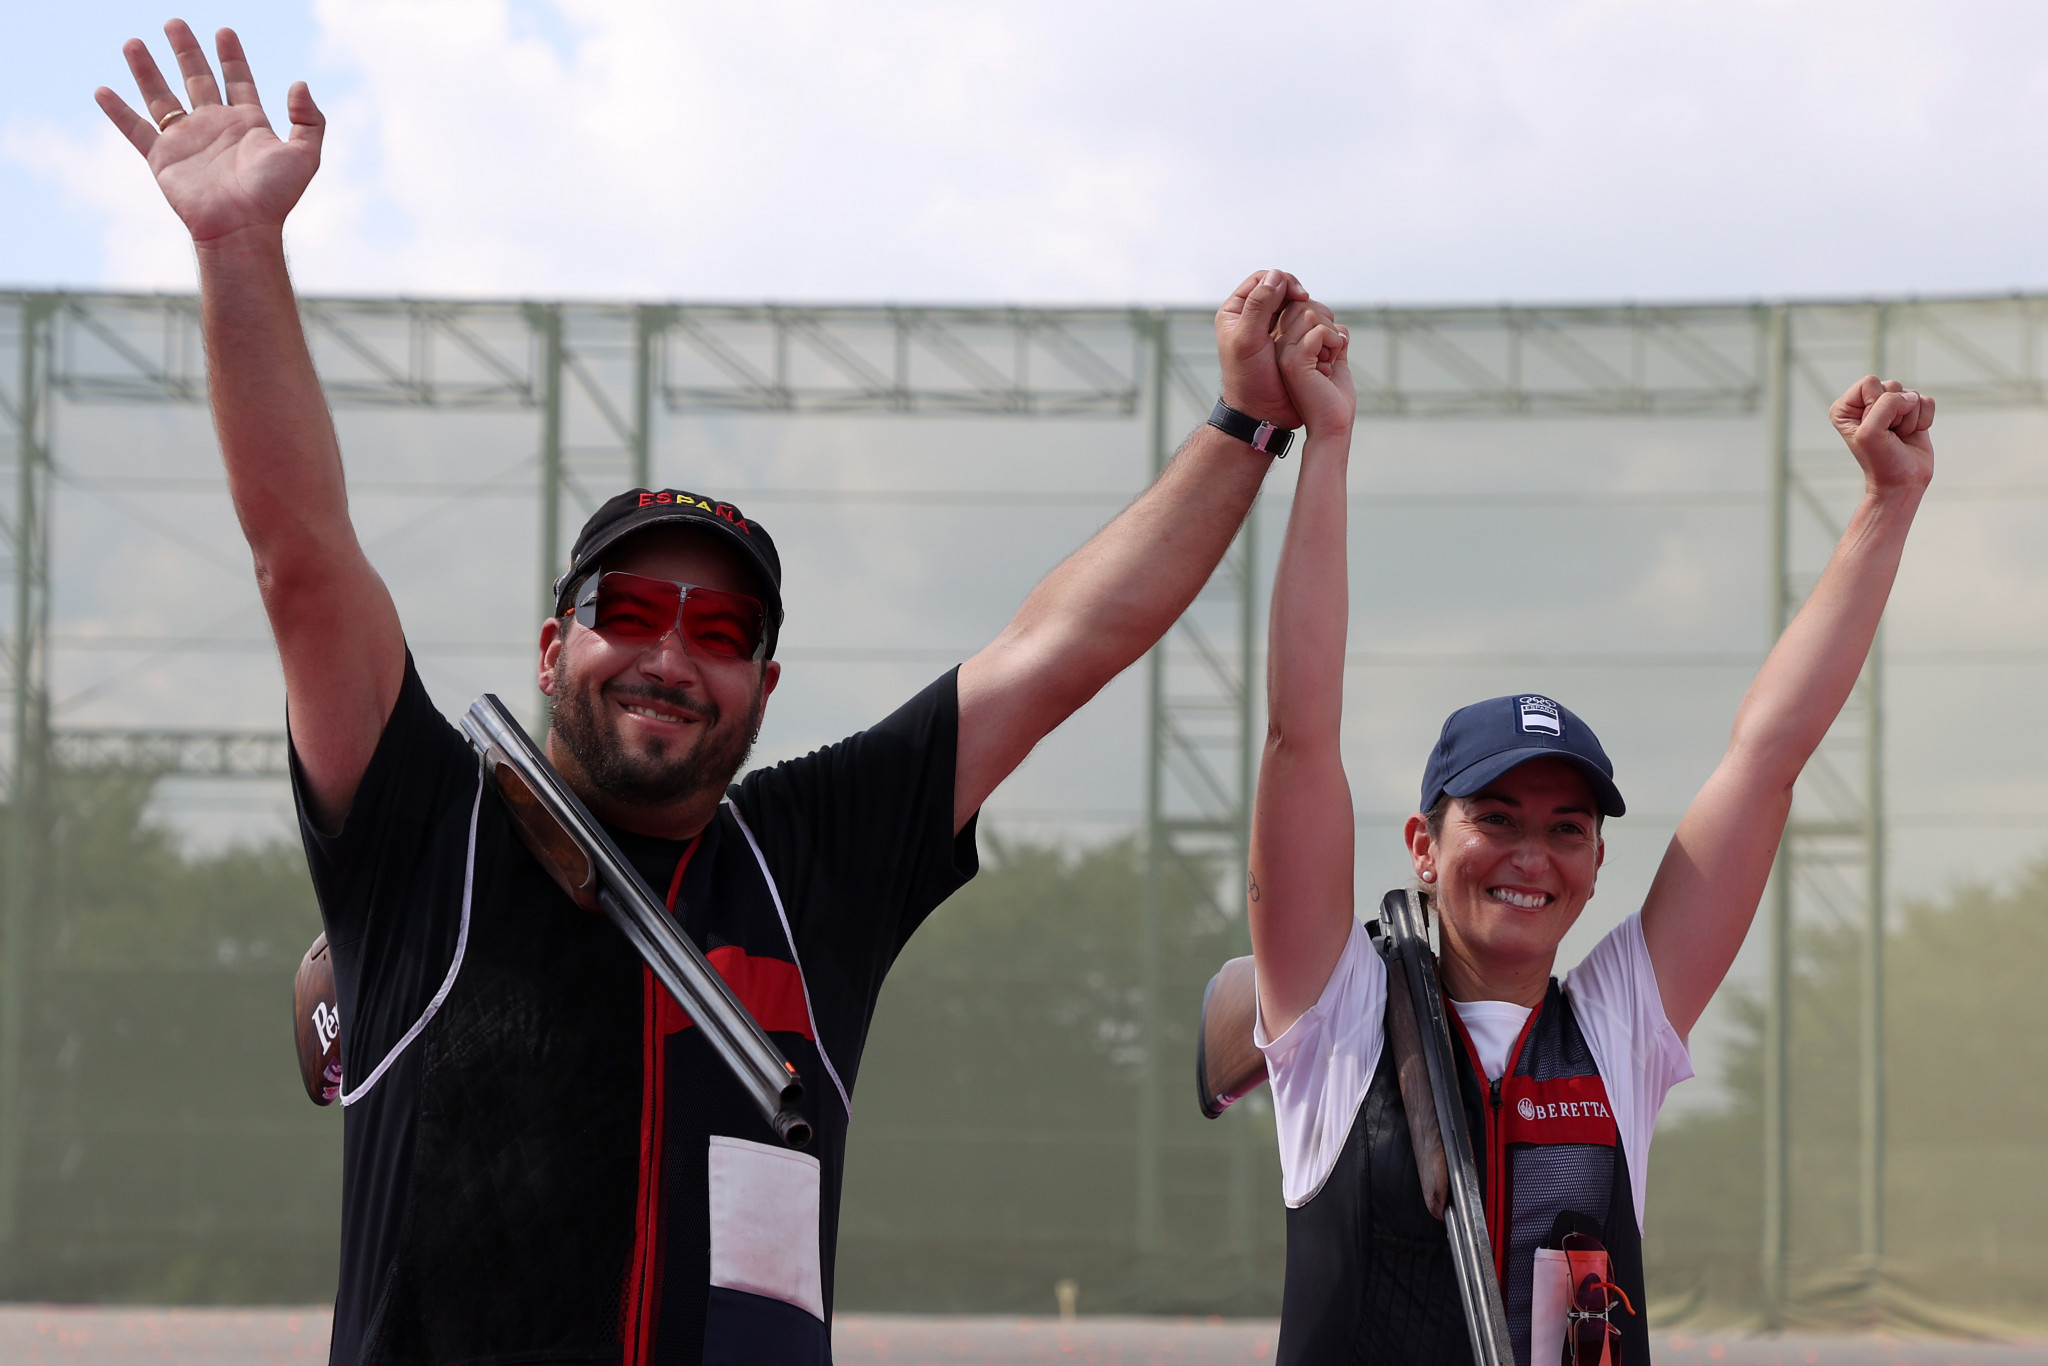 Alberto Fernández and Fátima Gálvez took the trap mixed team gold medal at the ISSF Shotgun World Cup ©Getty Images